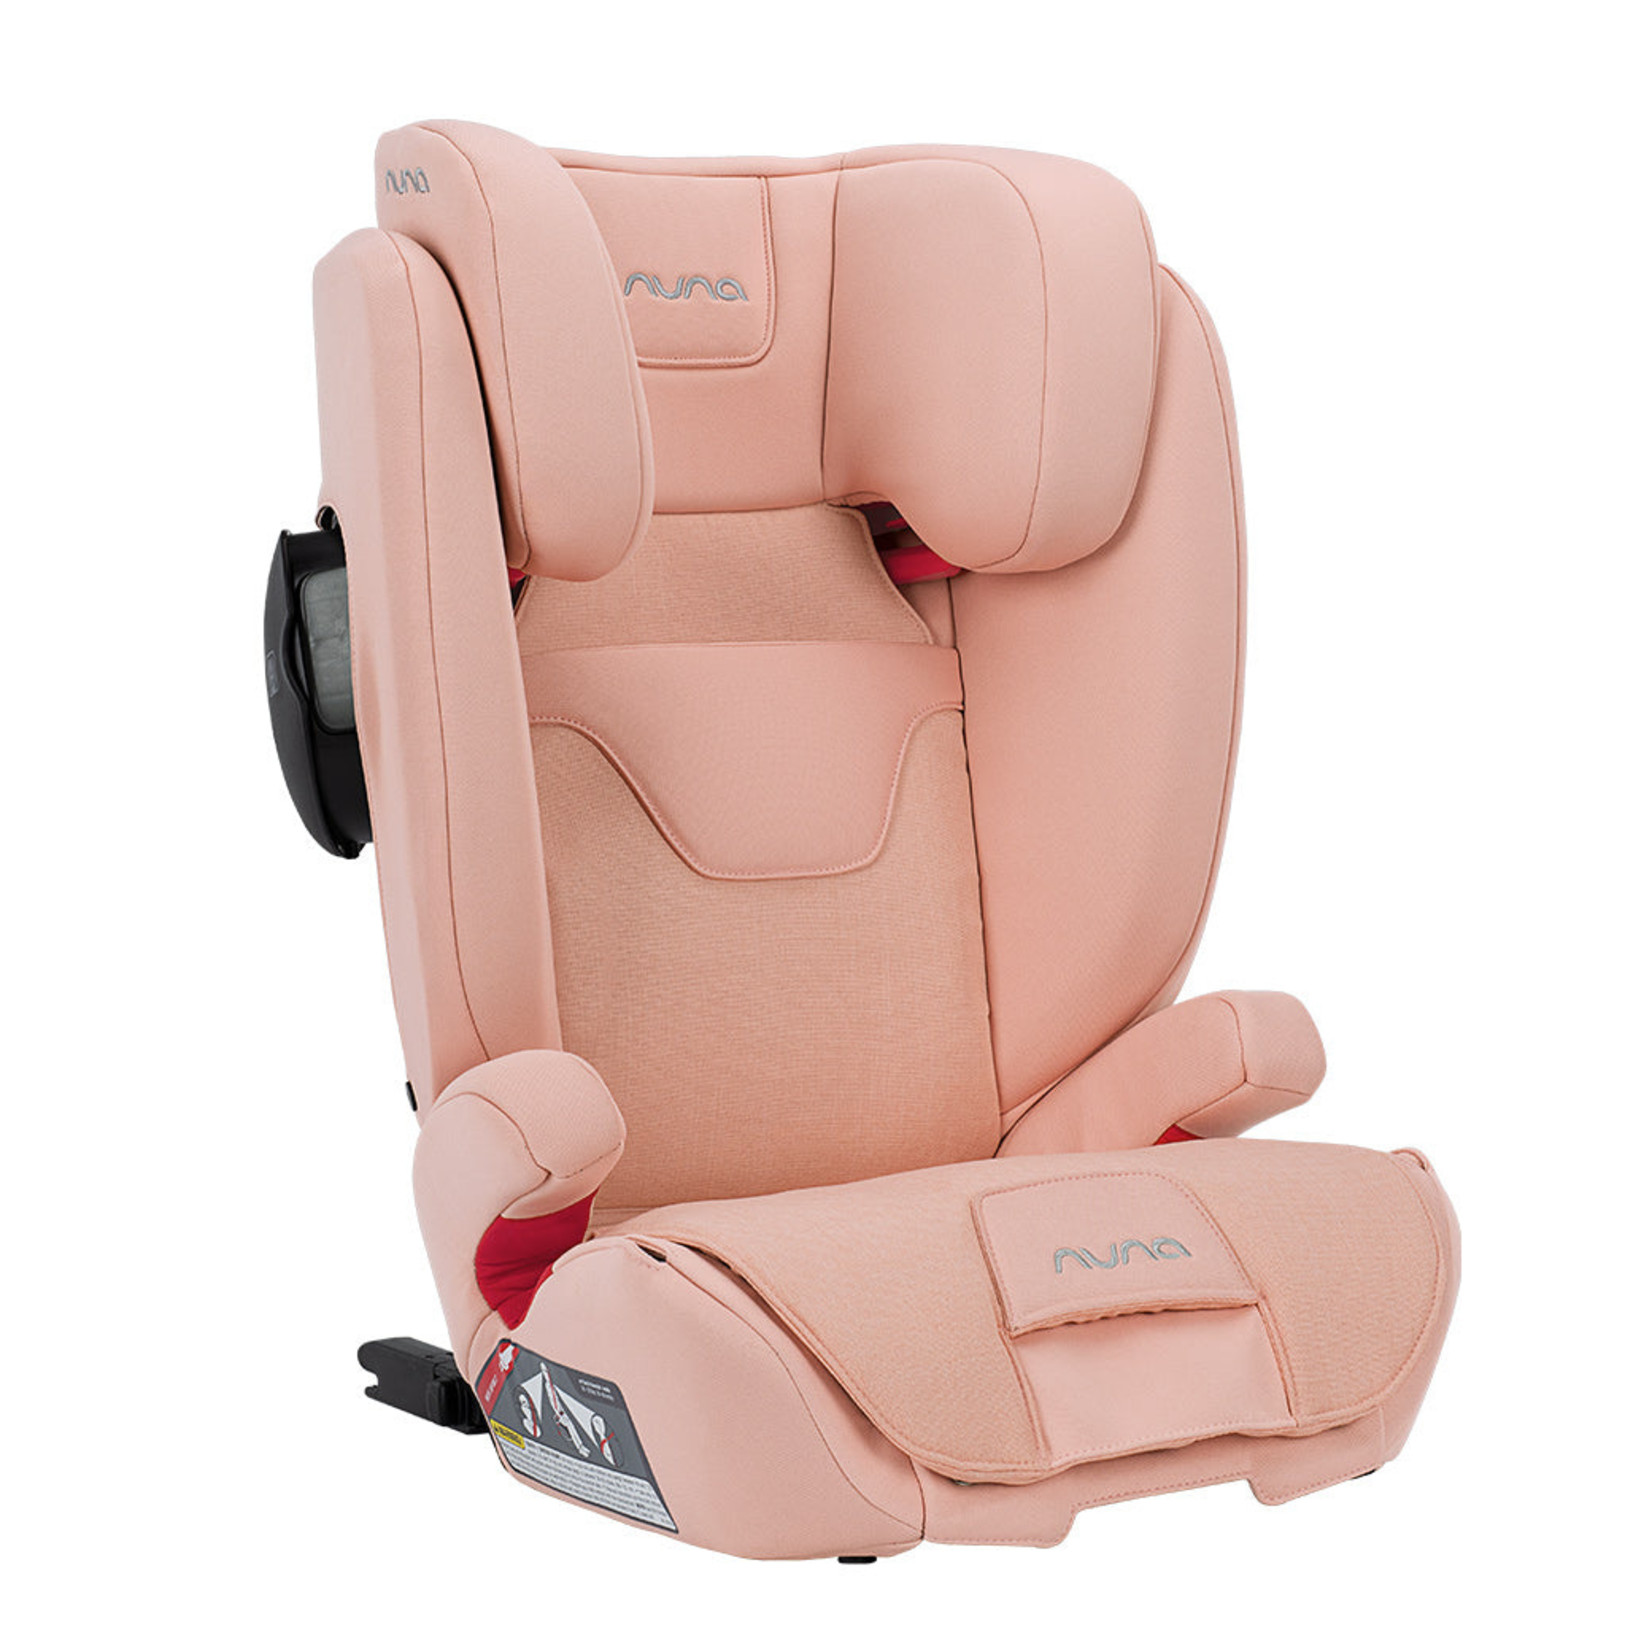 Nuna AACE Booster Seat - Coral